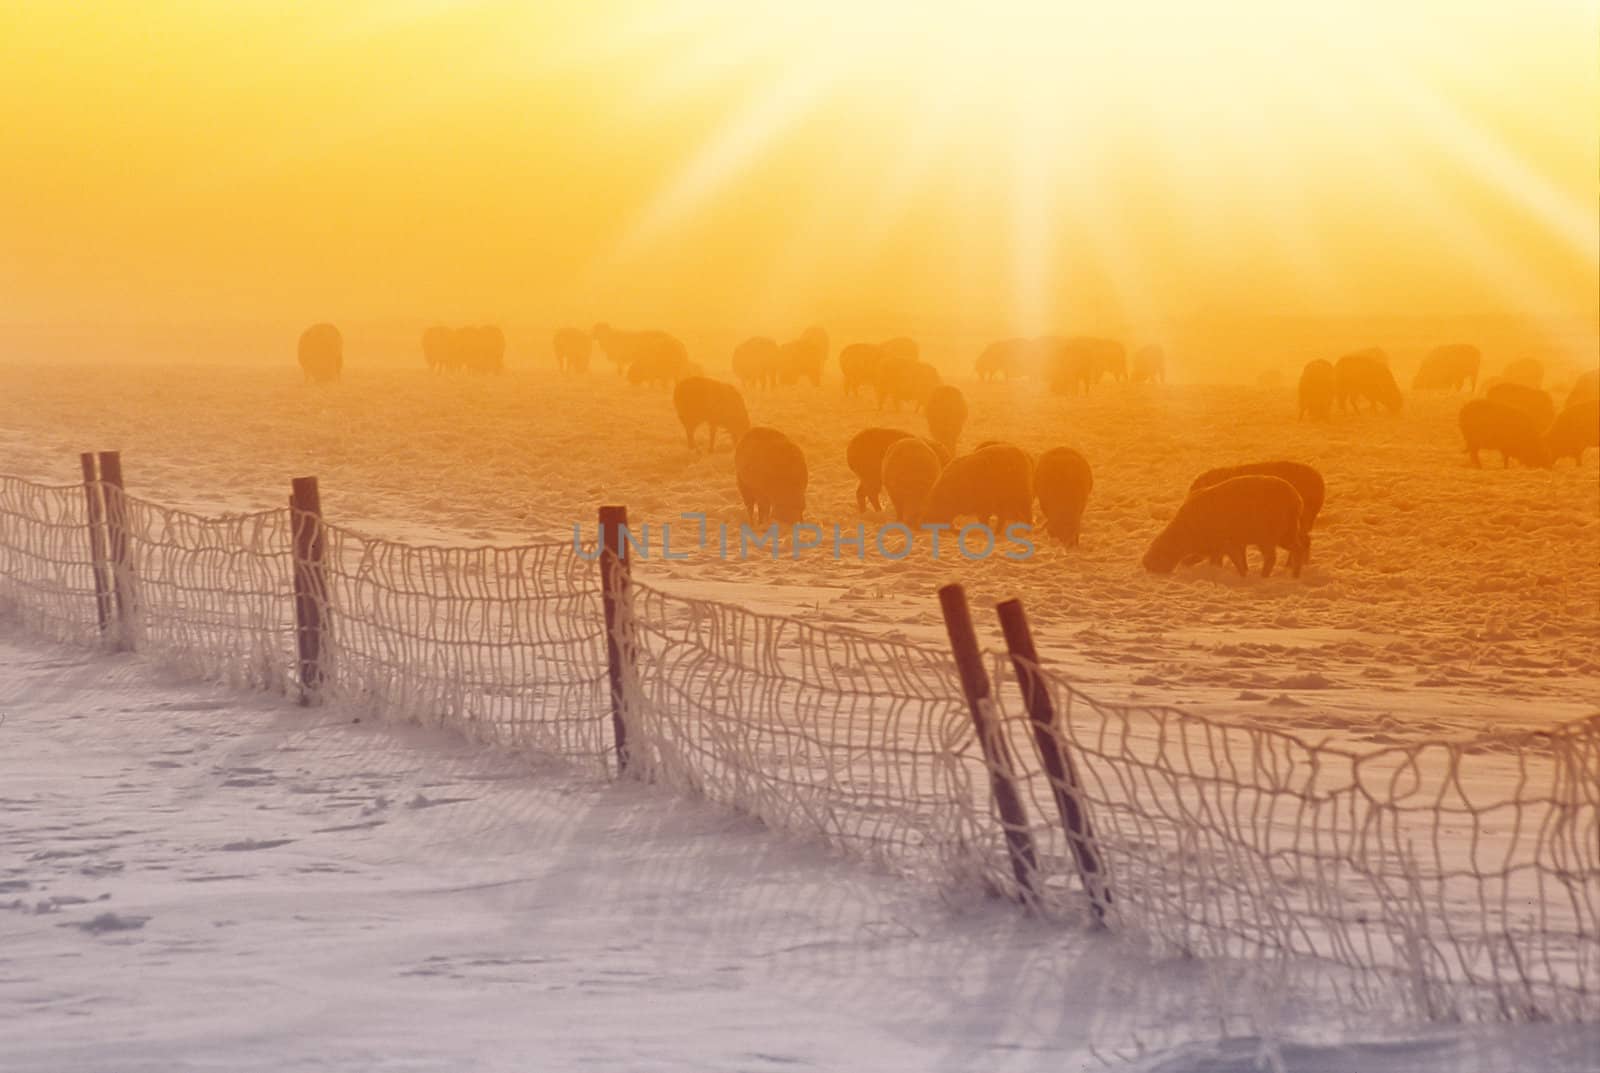 sheeps in icy cold snow with nice sunset